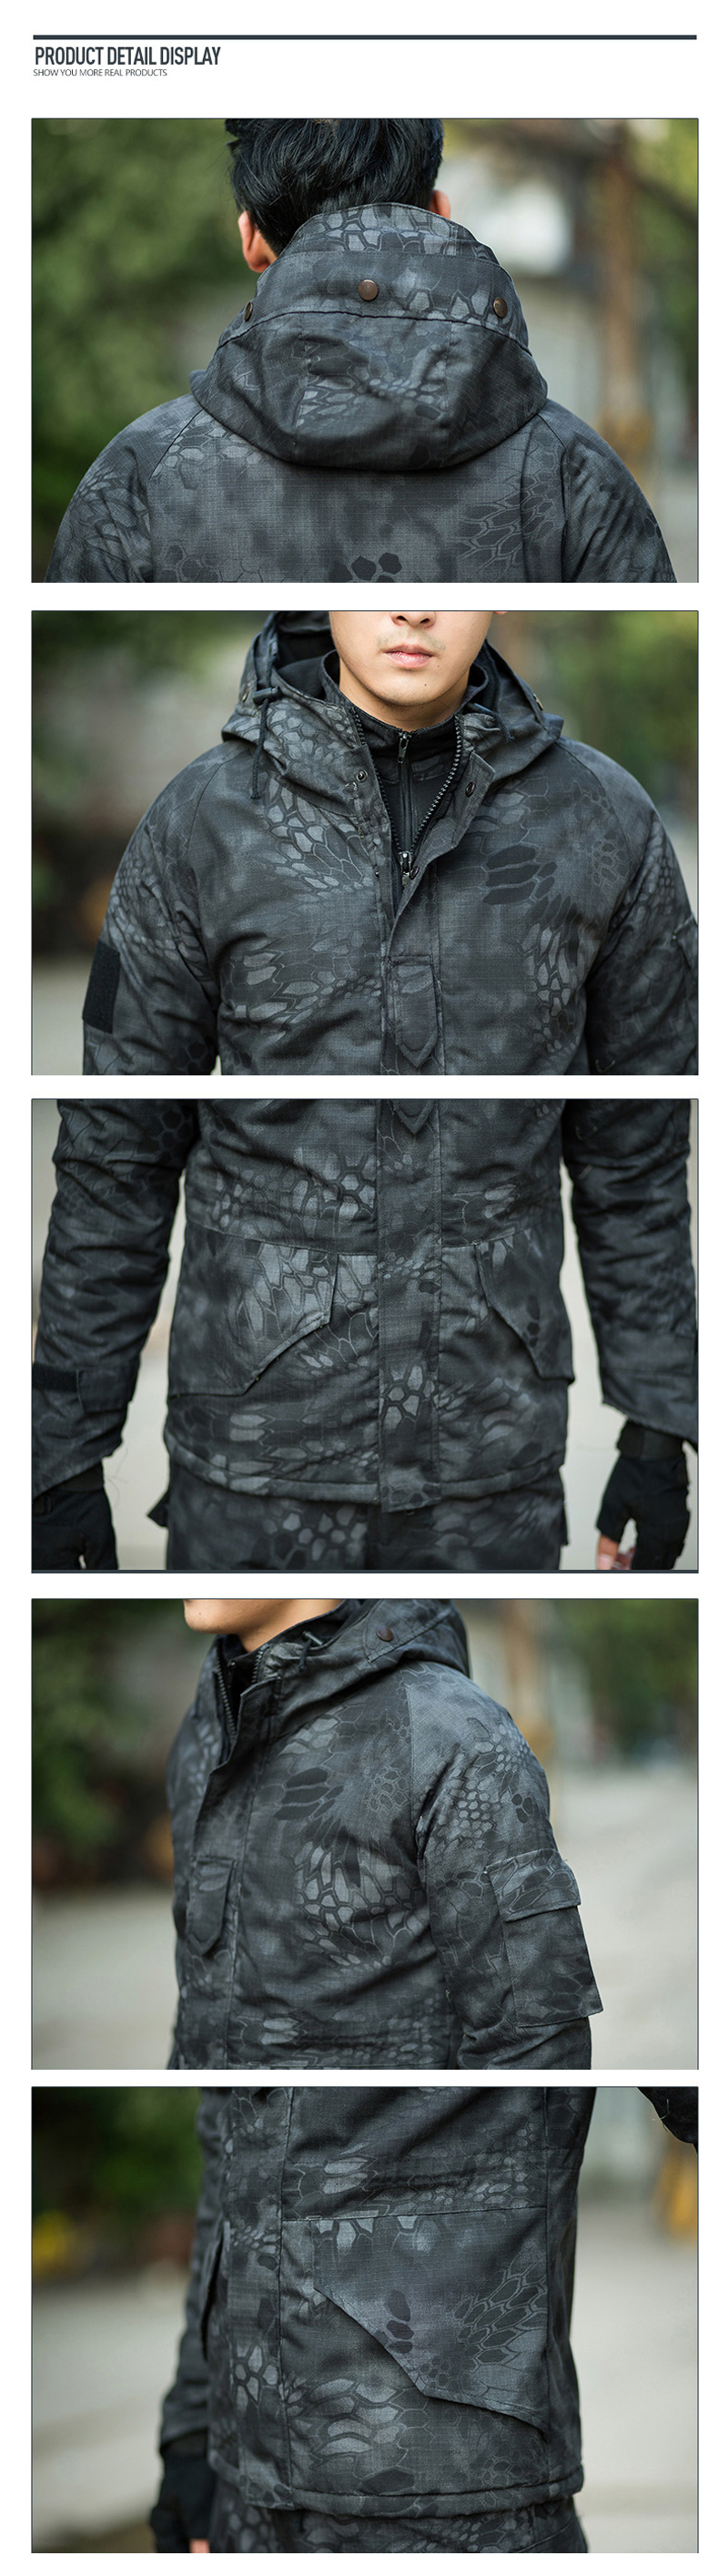 Men-Outdoor-Windproof-Army-Military-Jacket-G8-Python-Camouflage-Jackets-Tactical-Camo-Fleece-Python--1337290